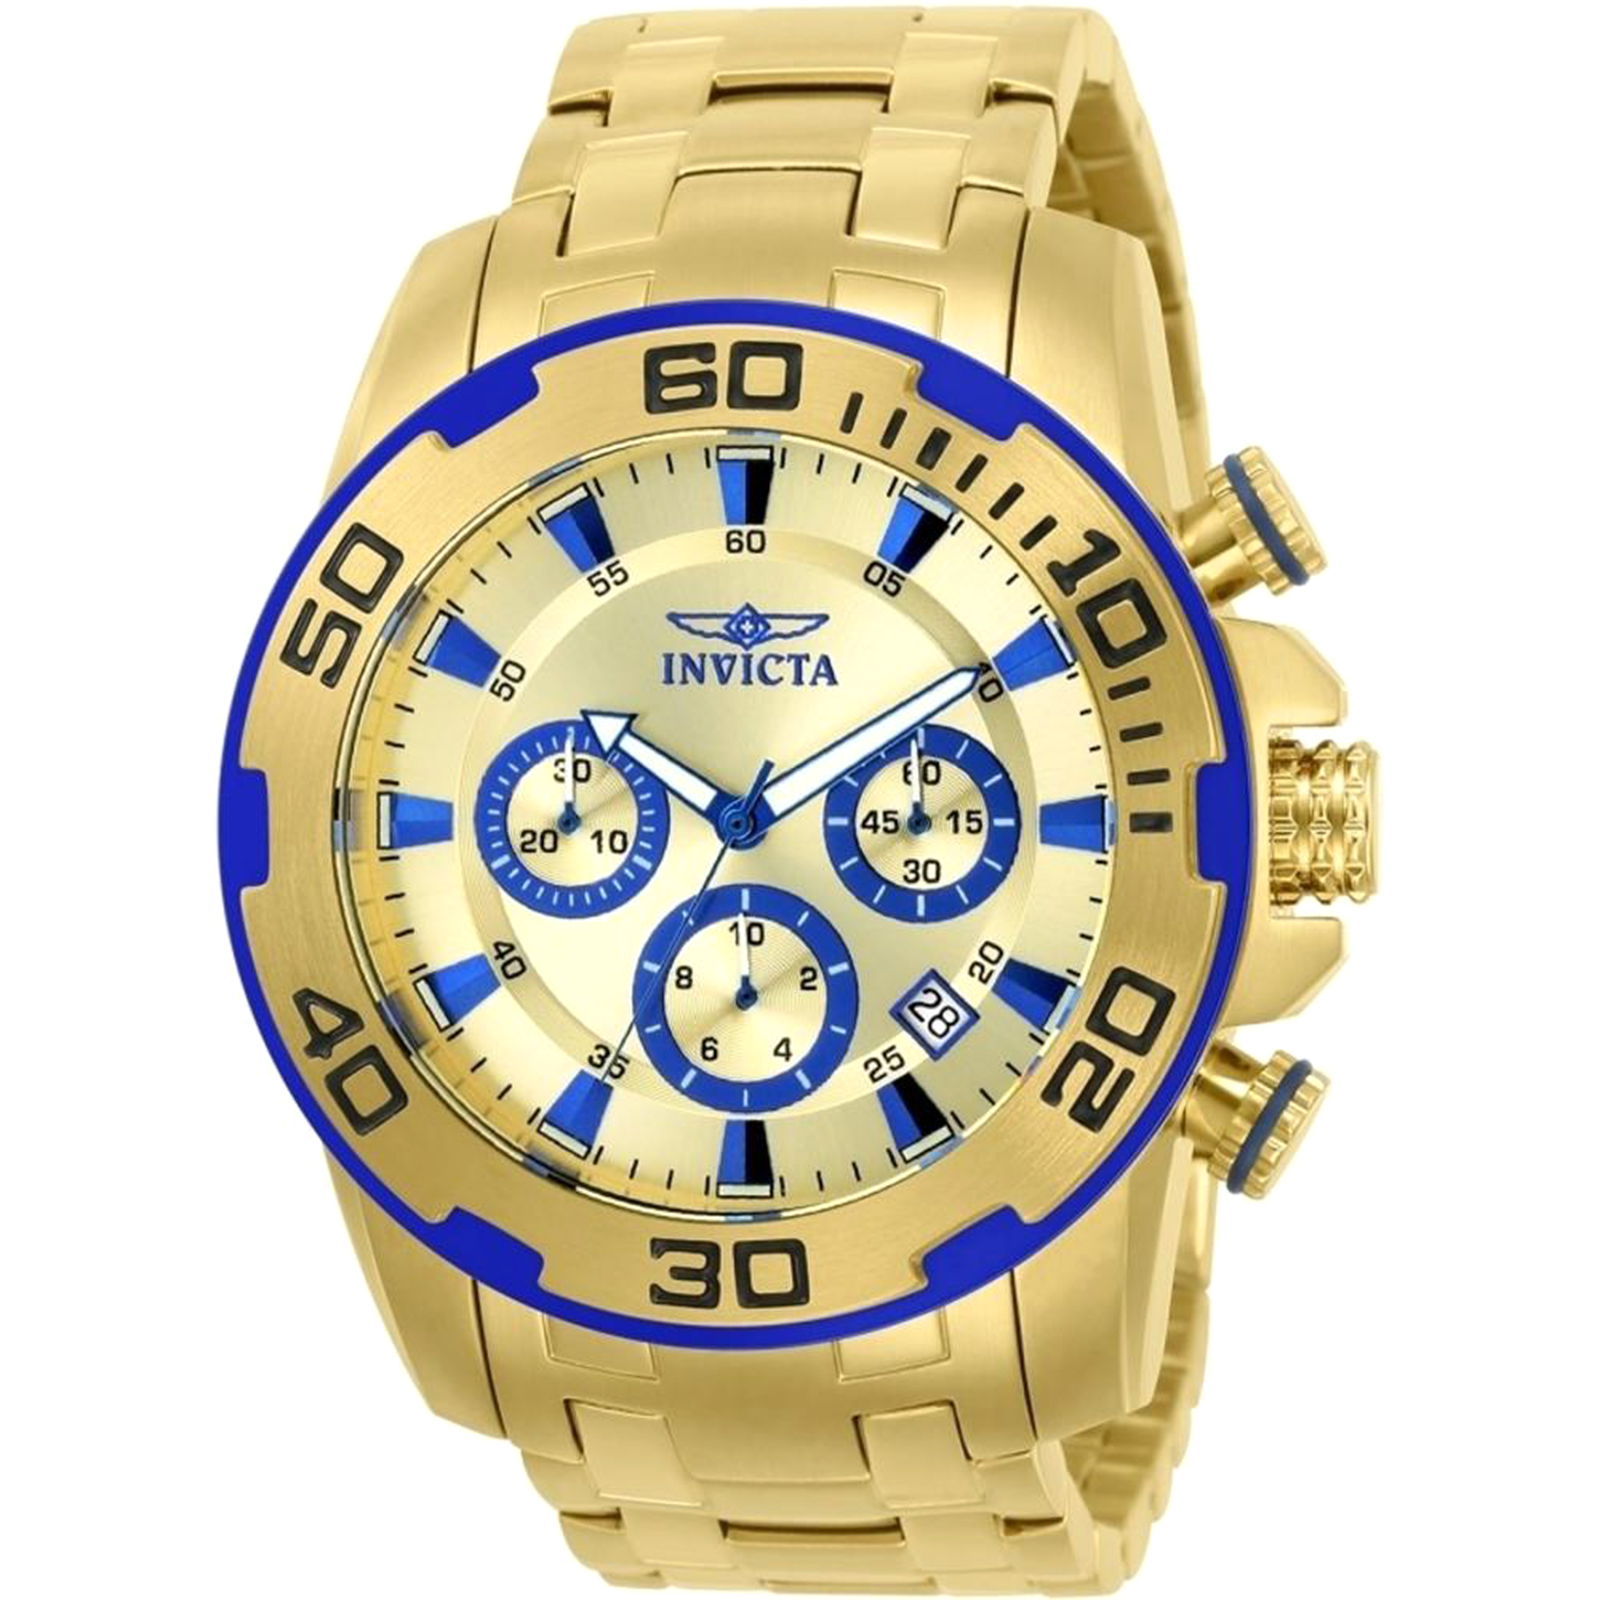 Invicta 22320 Men's Pro Diver Stainless Steel Chronograph Watch - Gold